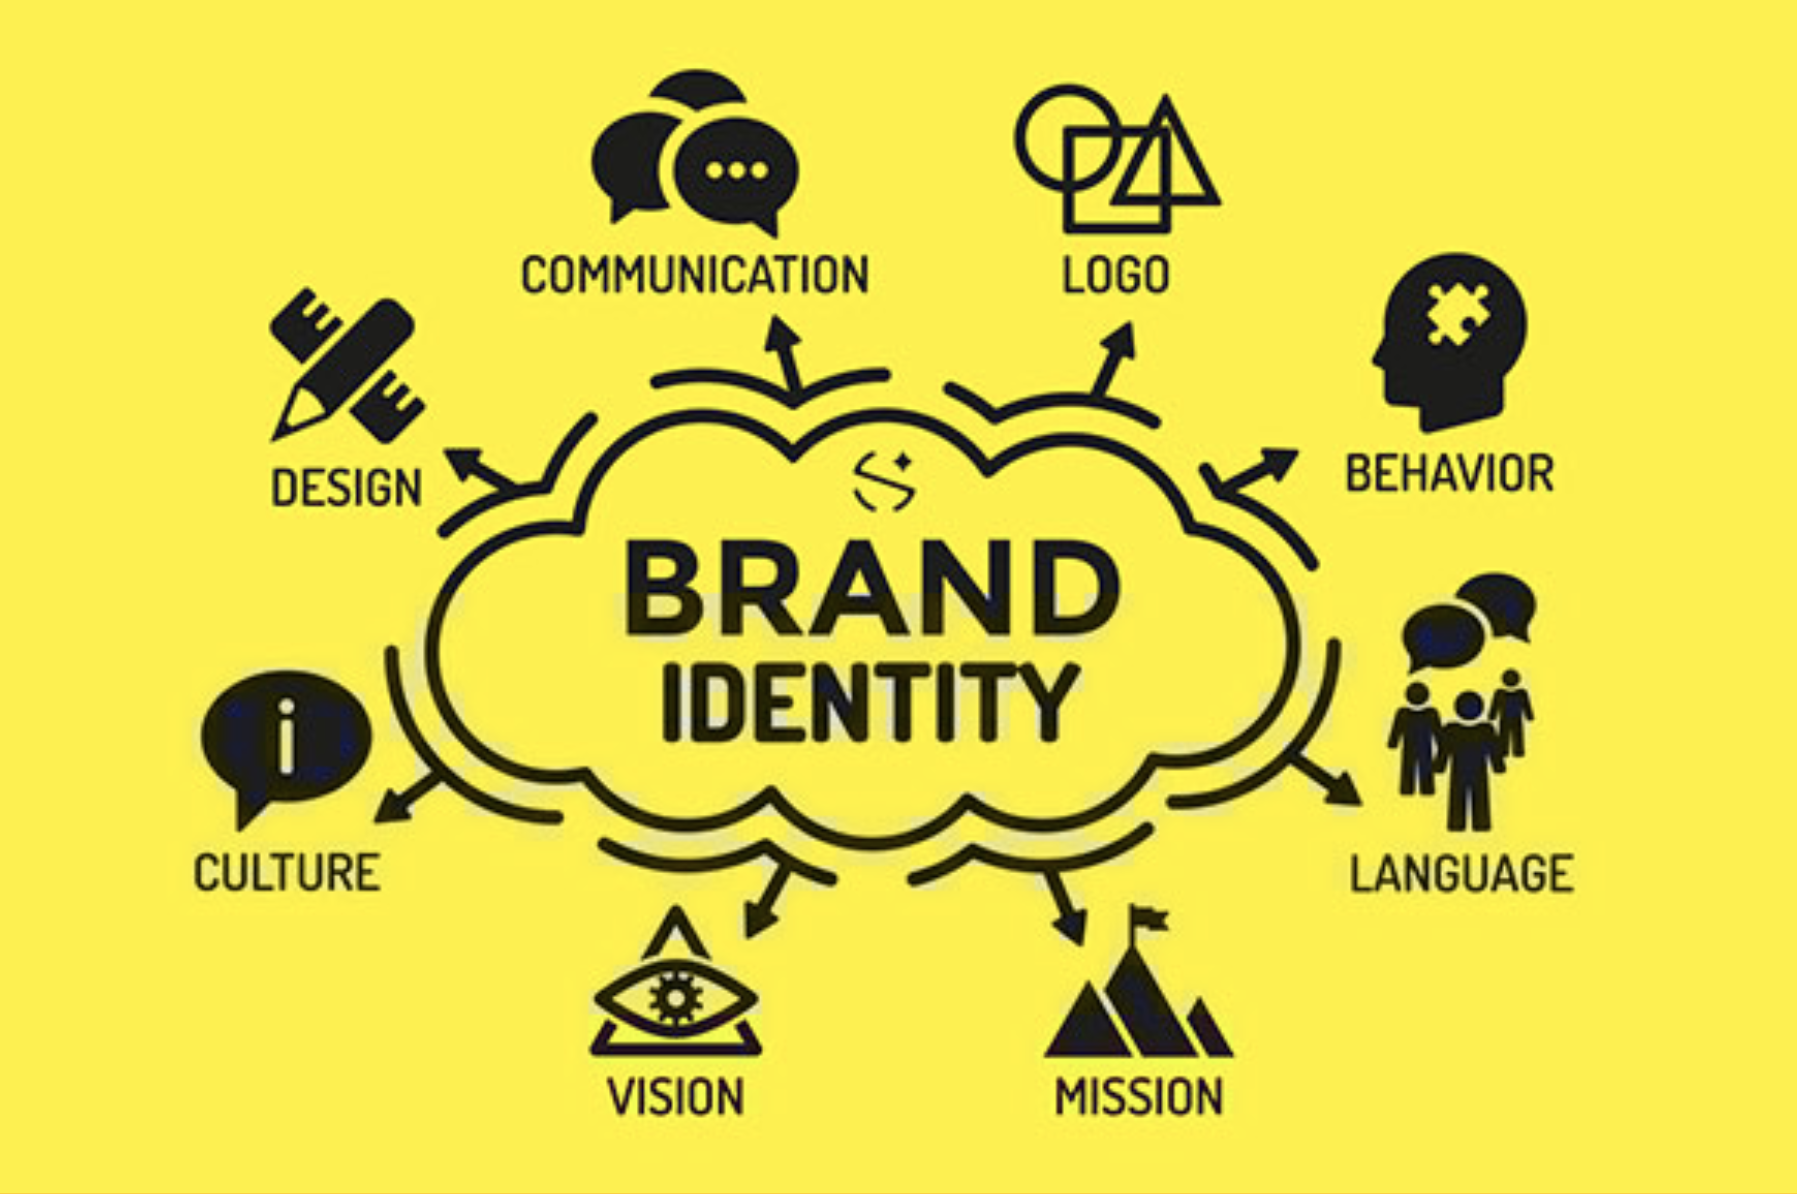 about presentation of brand image